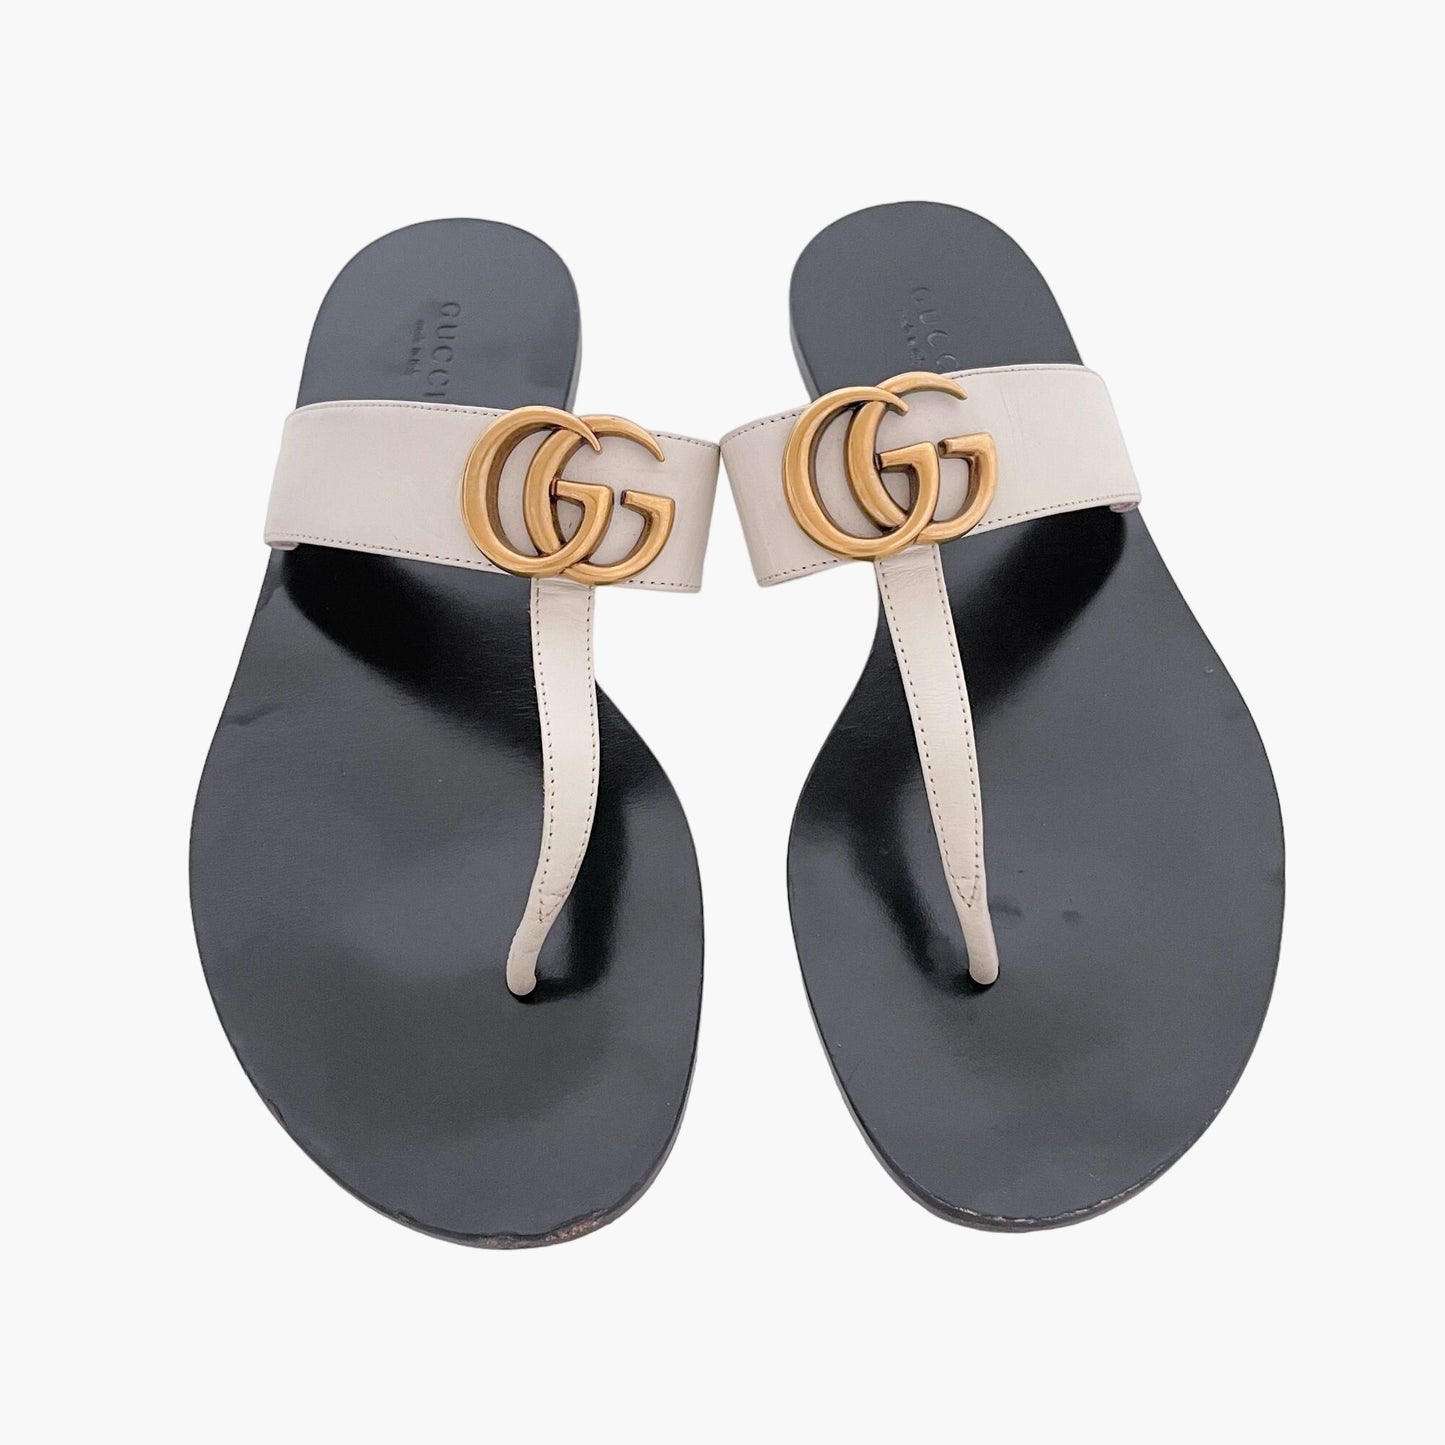 Gucci GG Marmont Thong Sandals in Beige Size 37